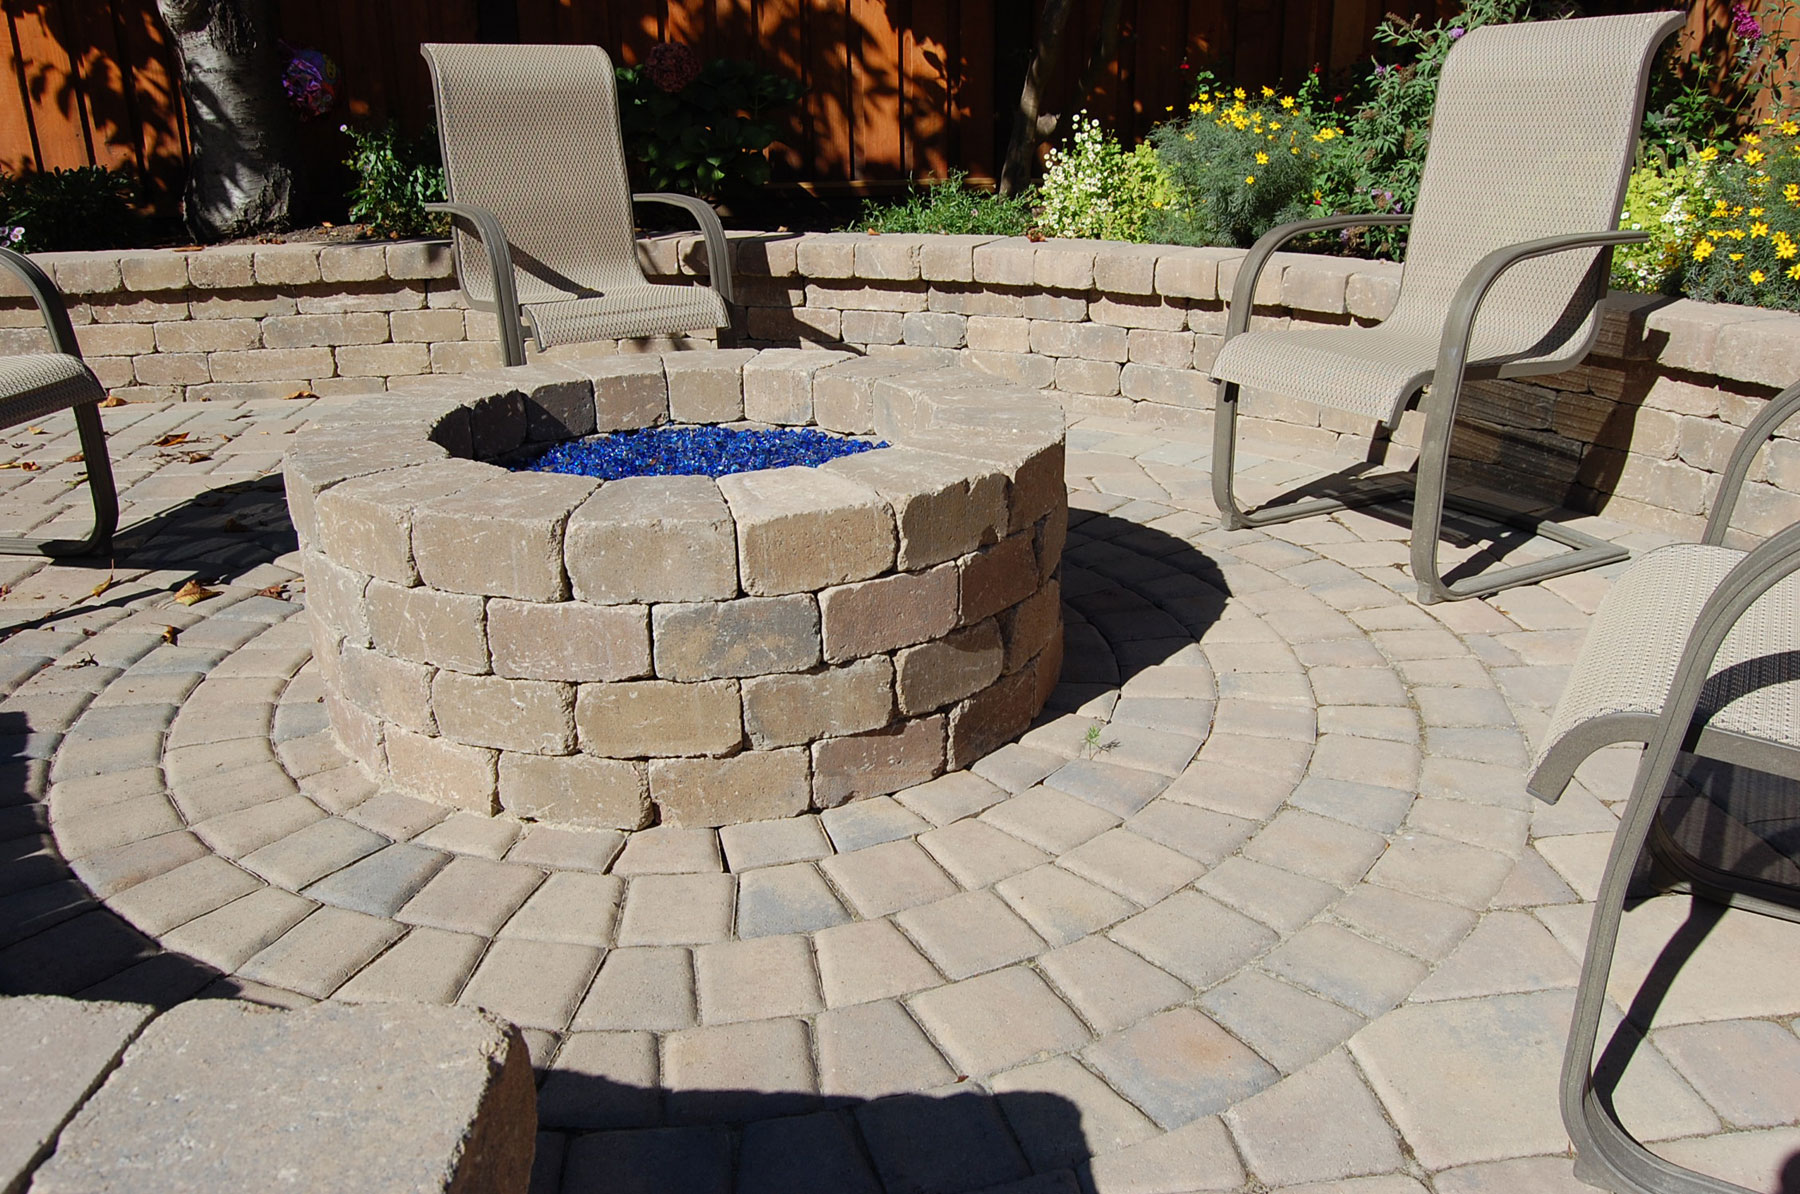 Firepit built with stone pavers